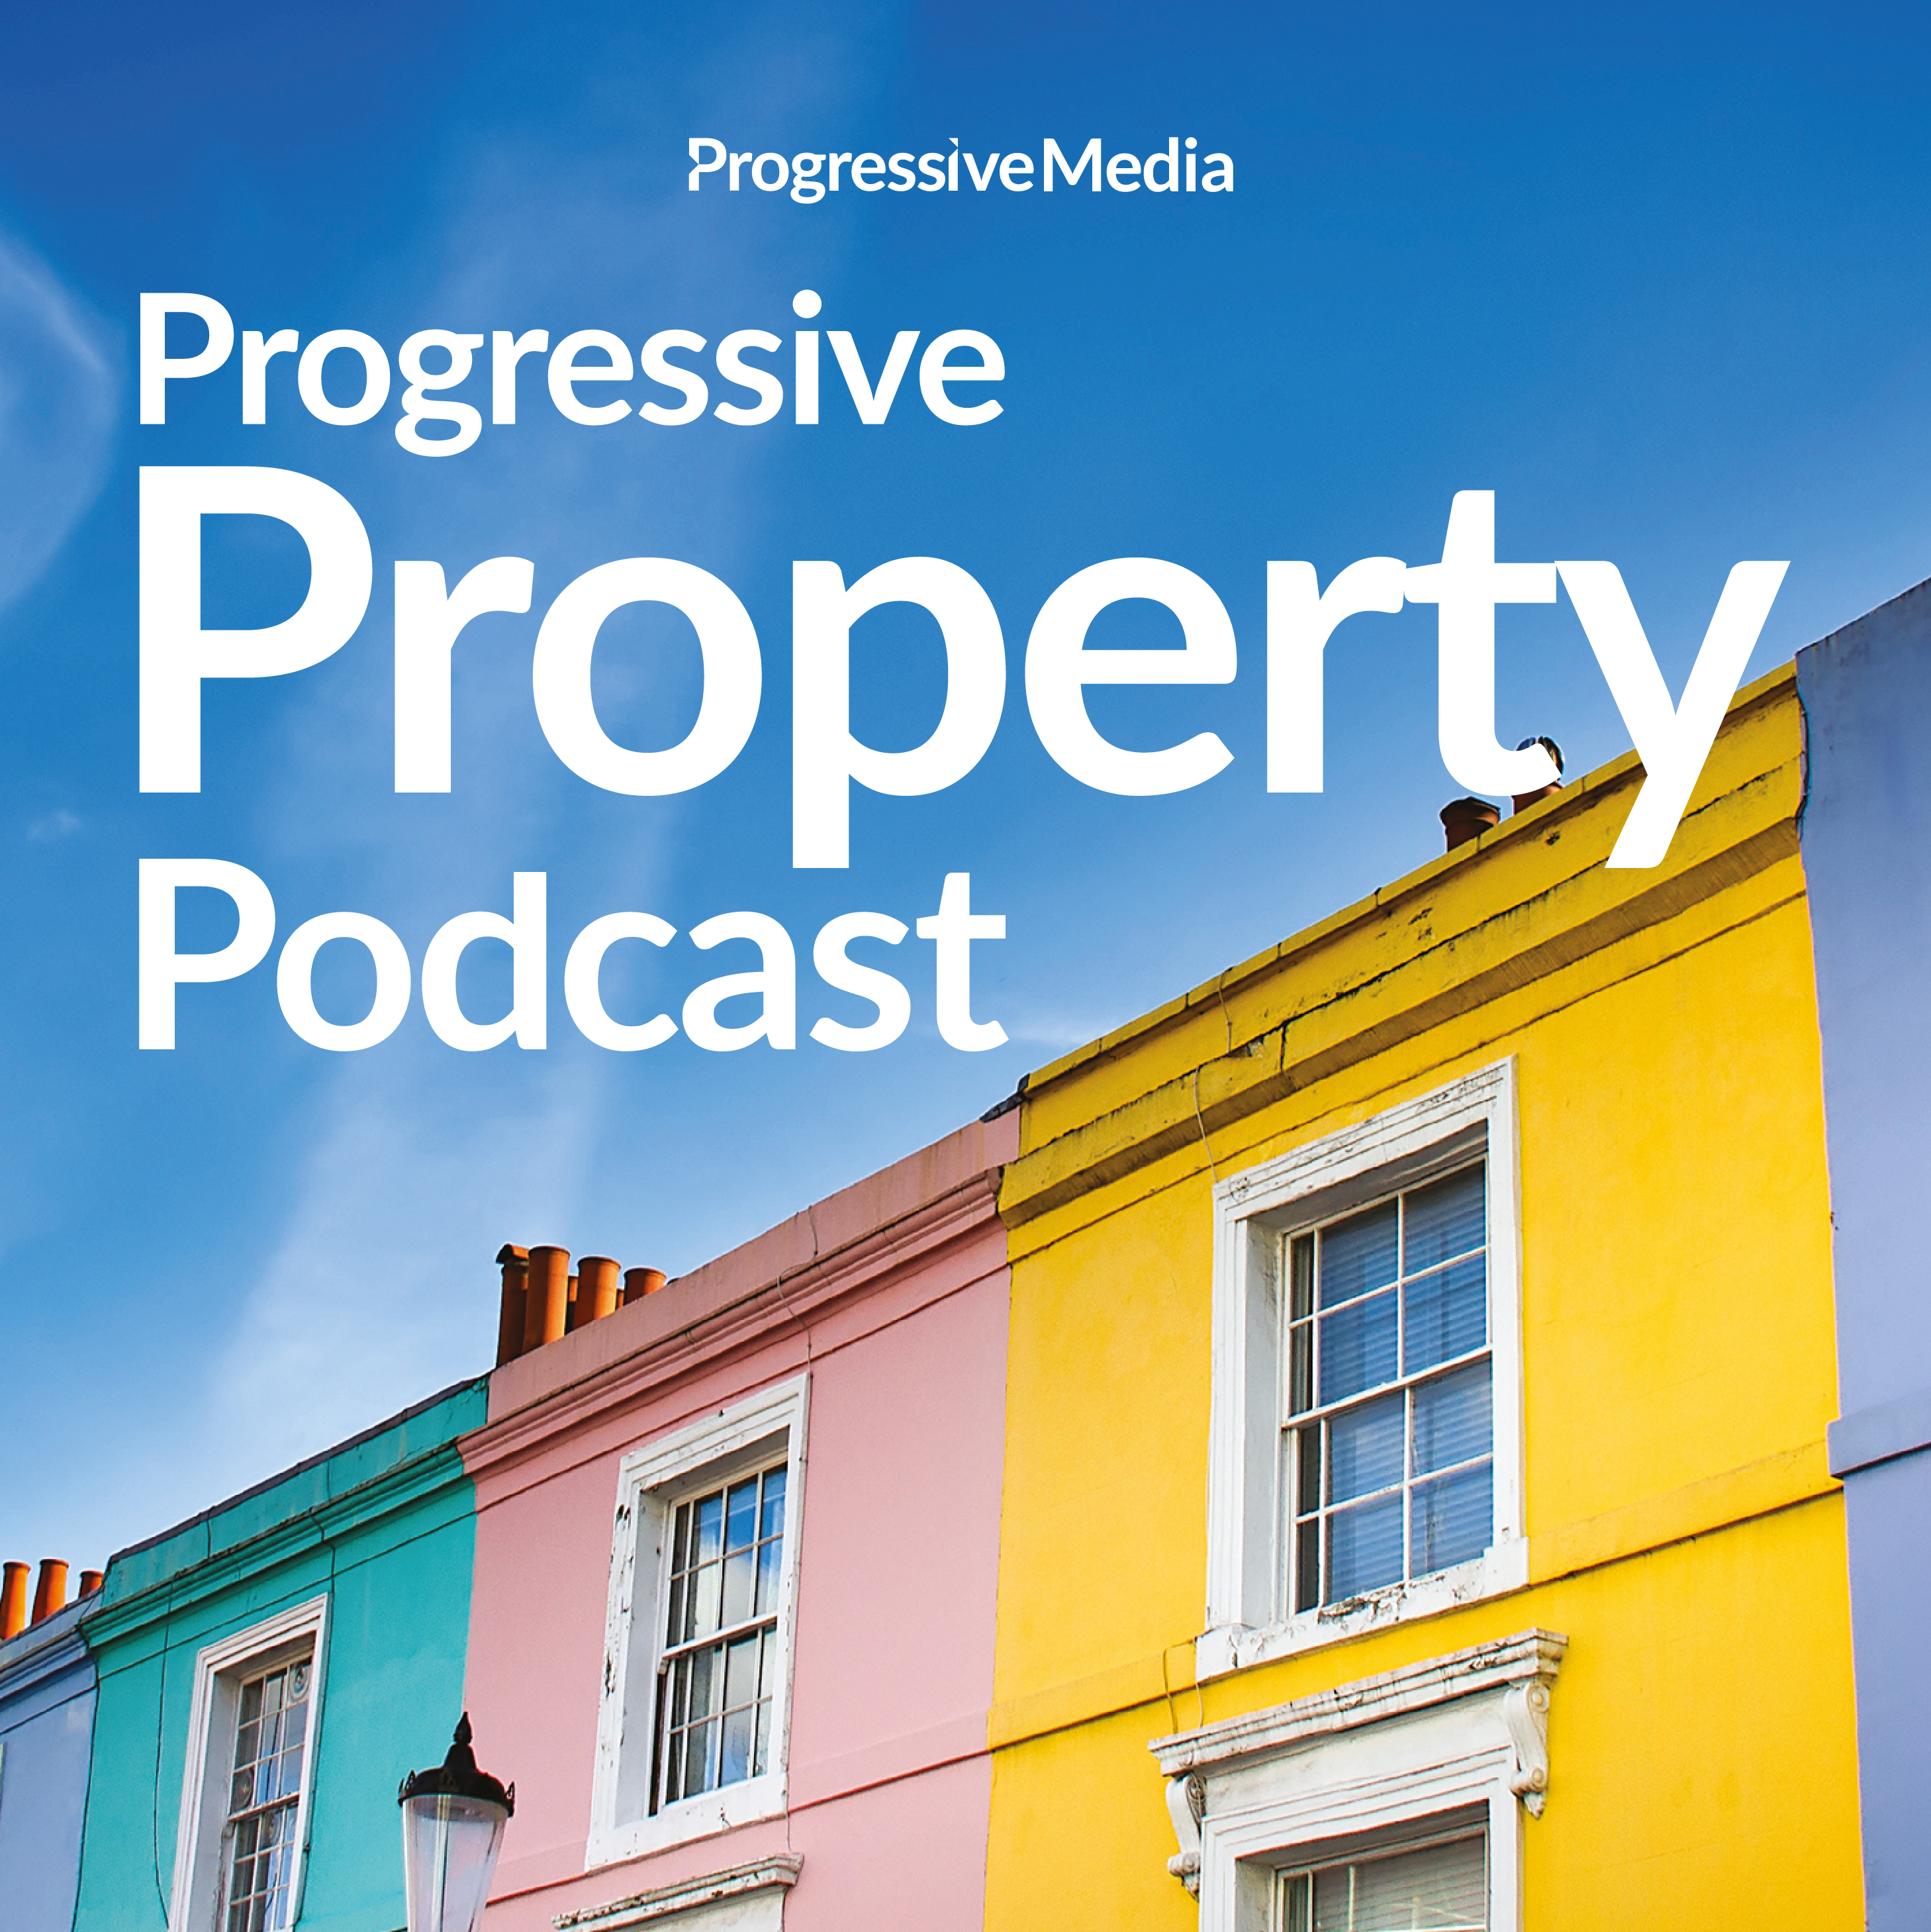 UK Leading Creative Property Solicitor Tells All